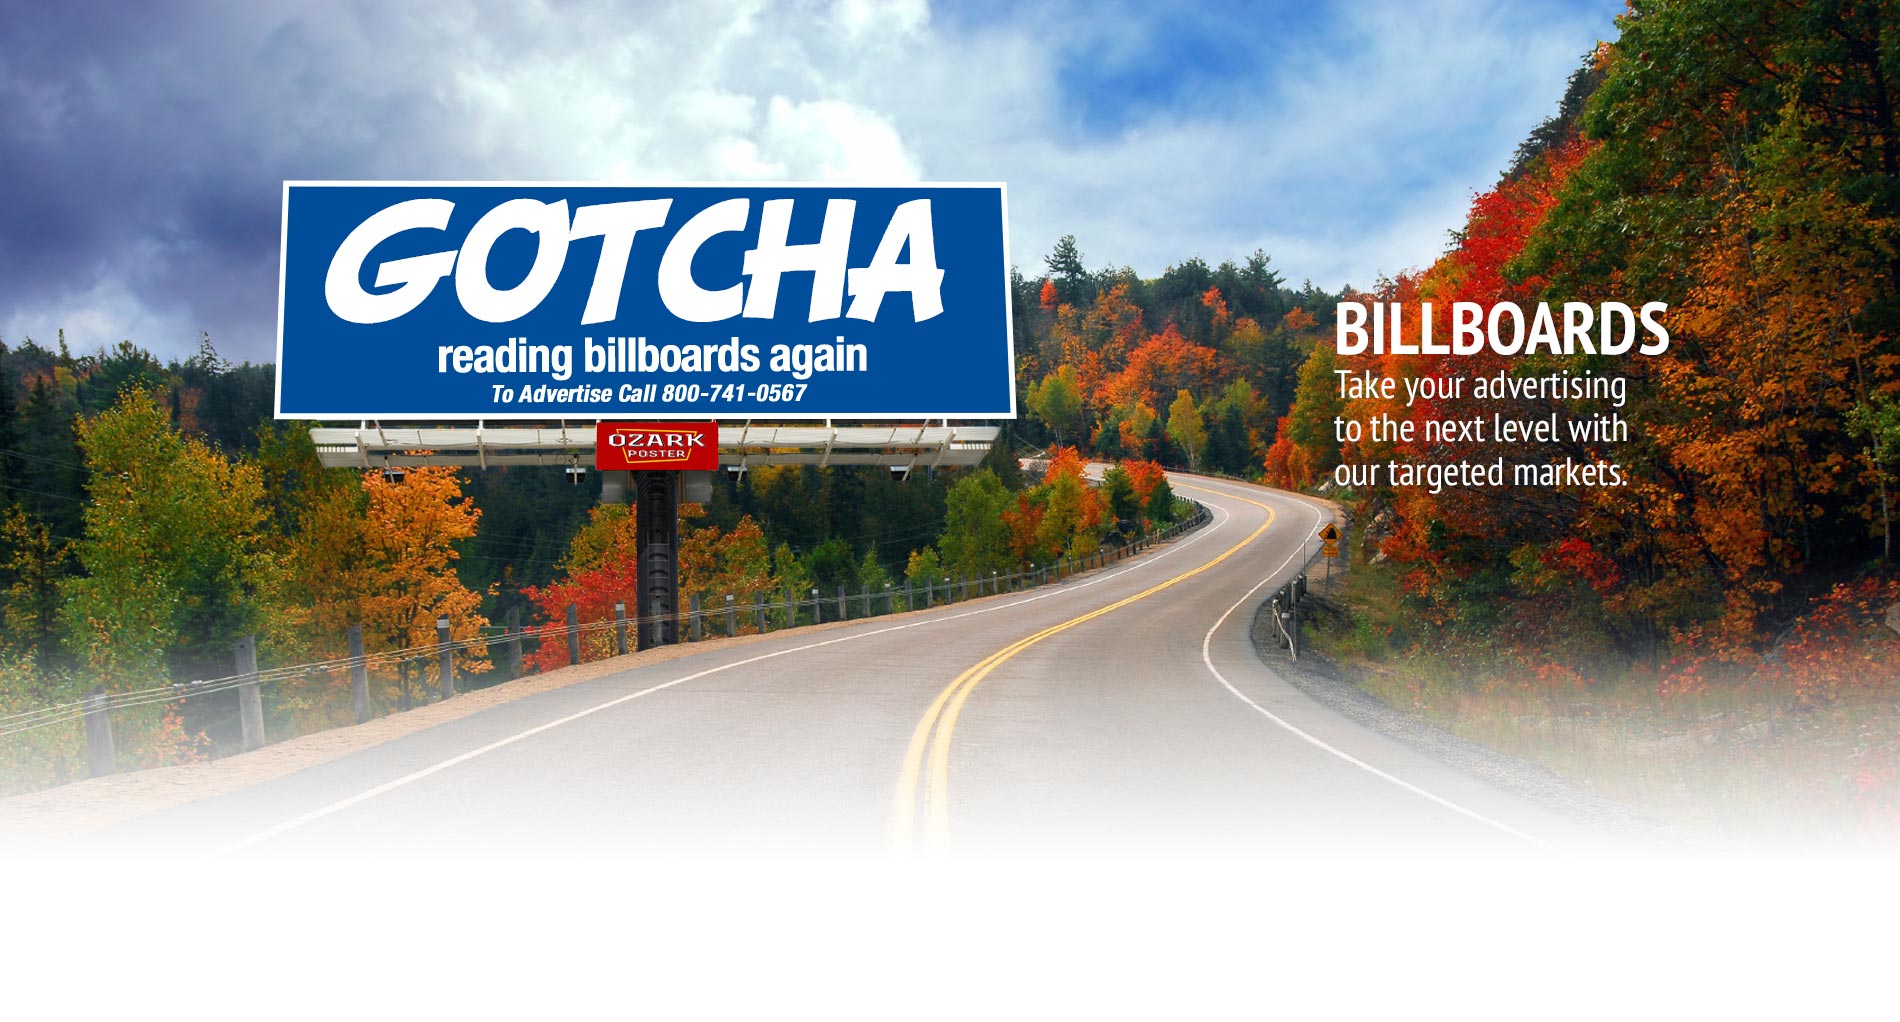 Take your billboard advertising to the next level with our targeted markets.